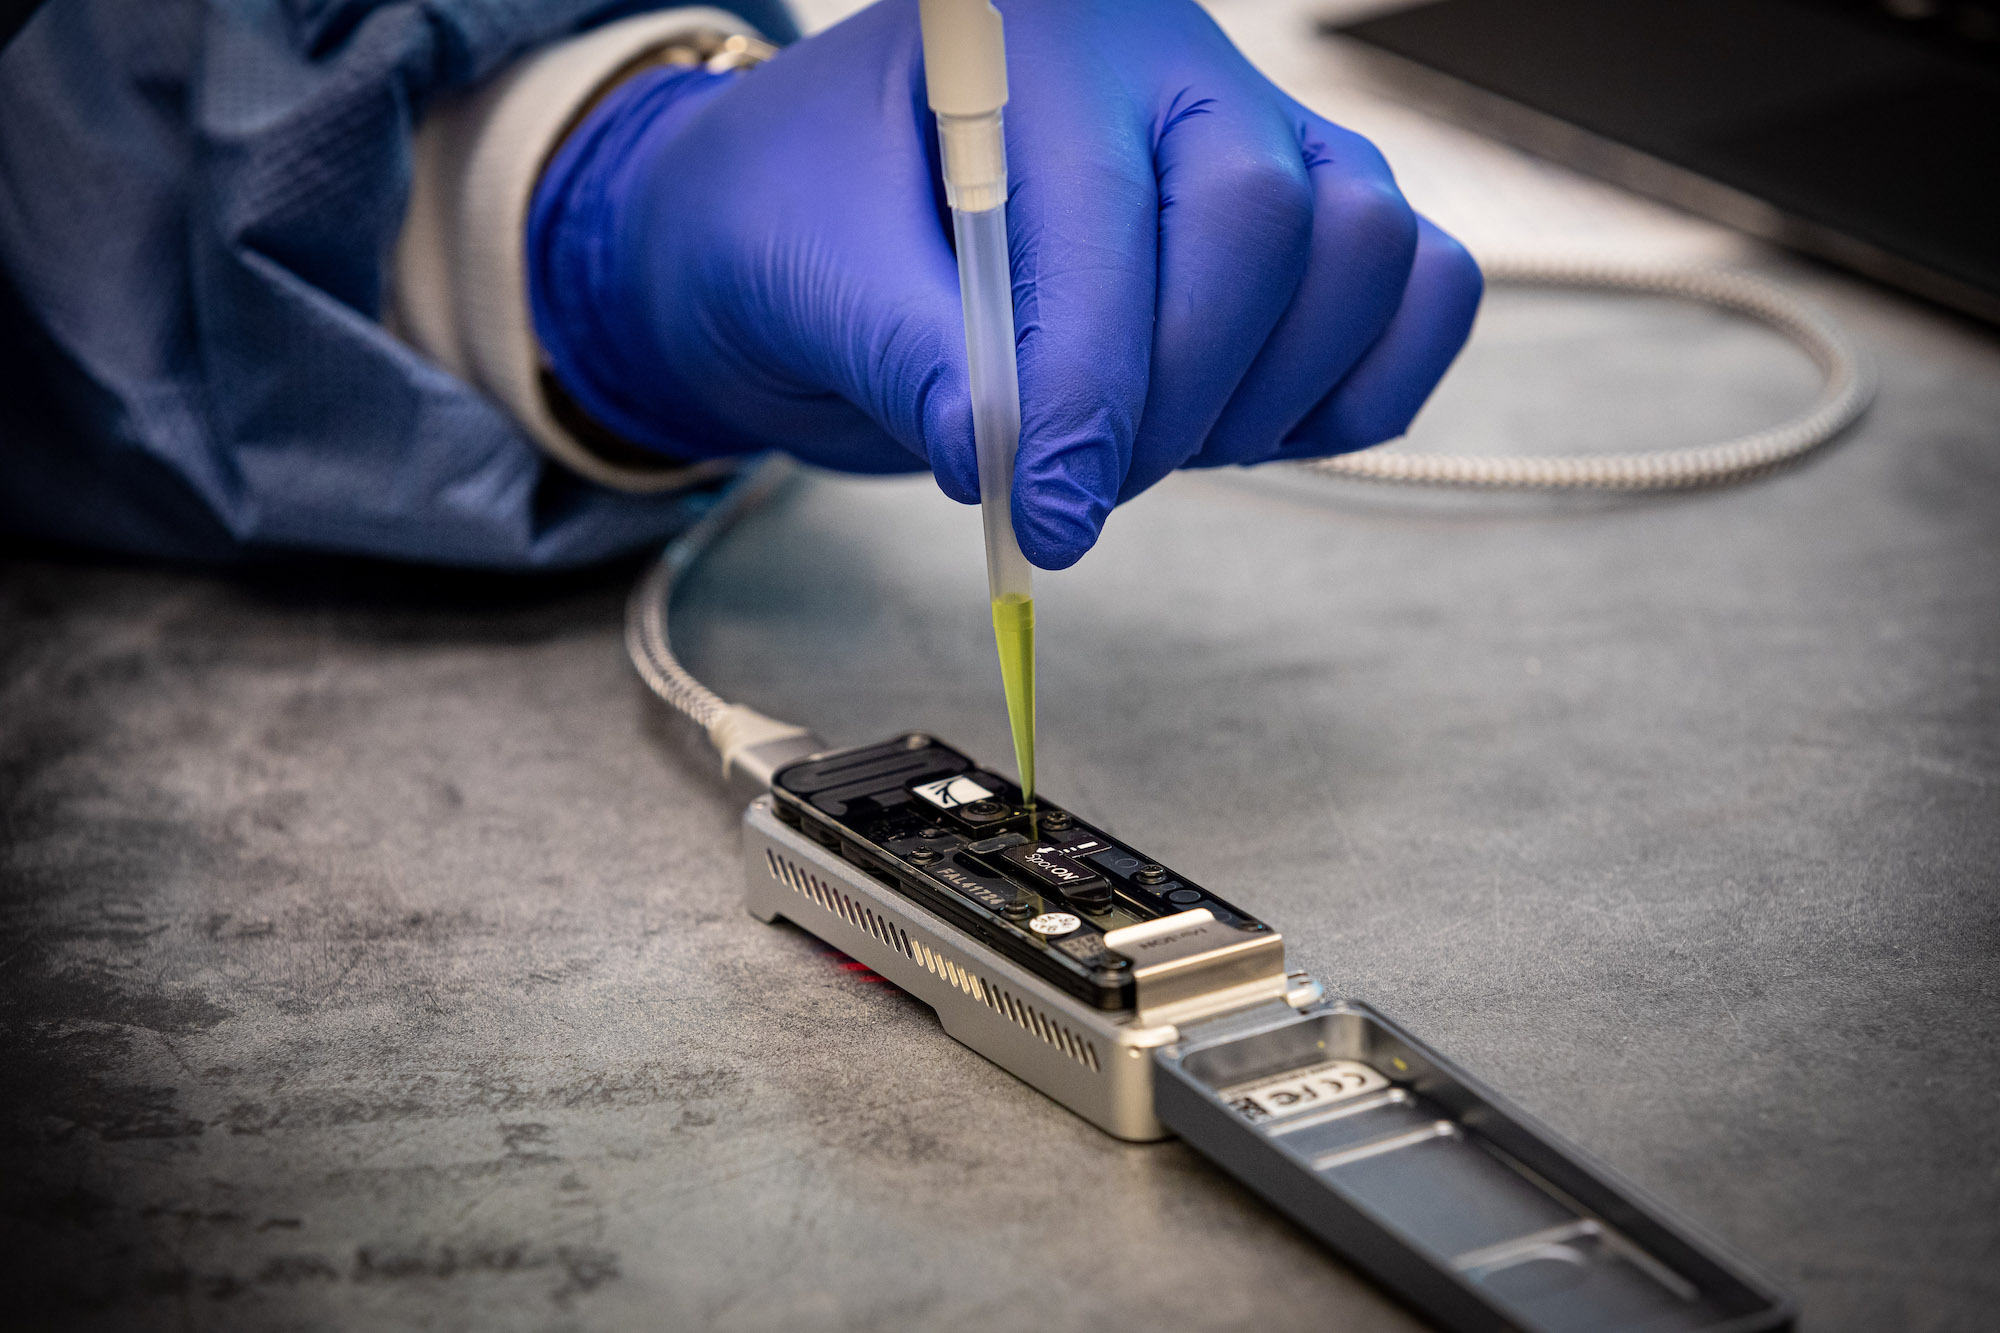 A loading buffer is injected into a hand-held DNA sequencer to prepare it for operation.